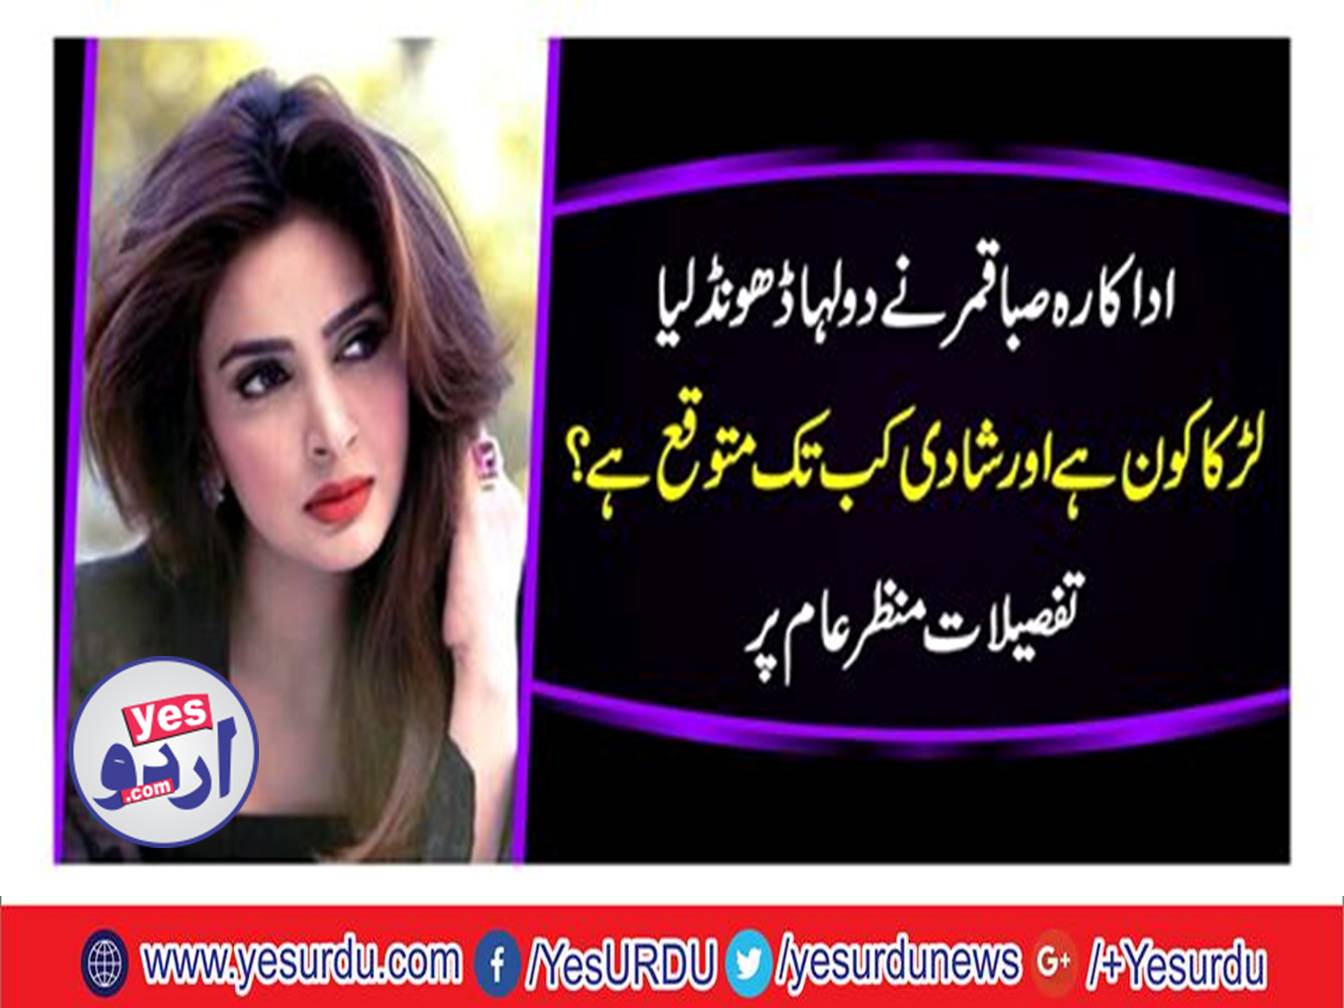 Popular actor of movies and TV Saba Qamar will get married and settle down this year end